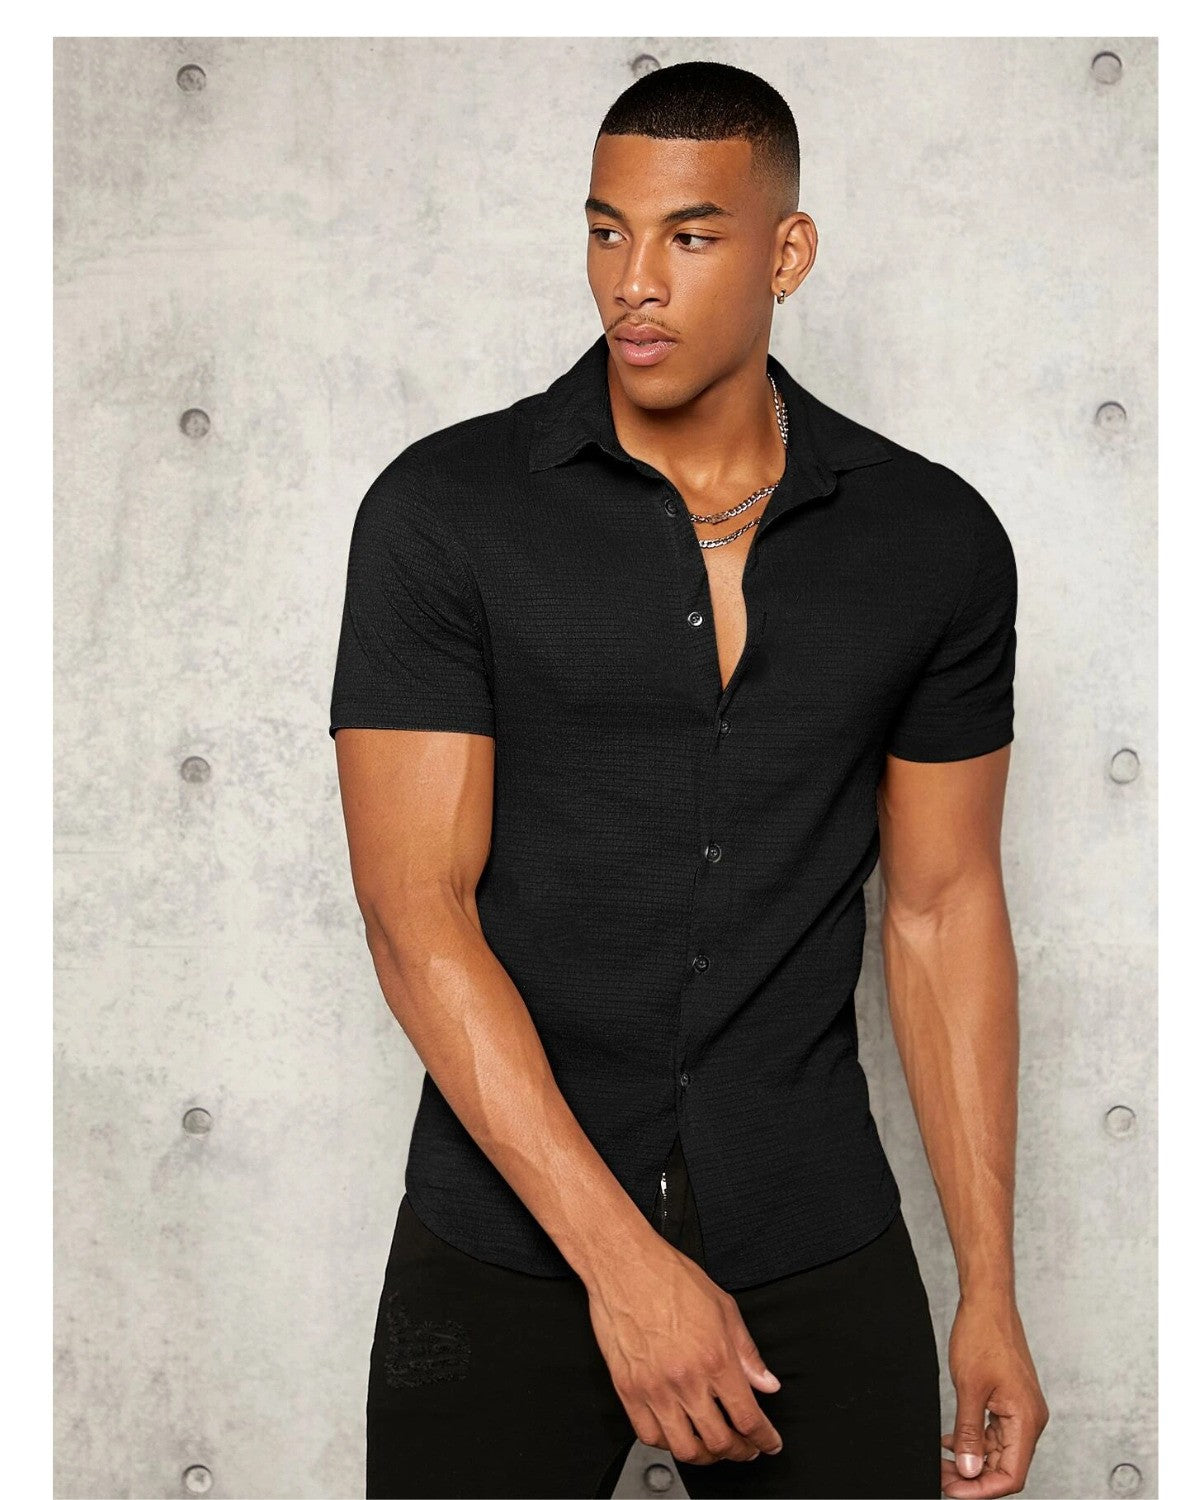 Black Colour Imported Casual Wear Short Sleeve Shirt For Men's